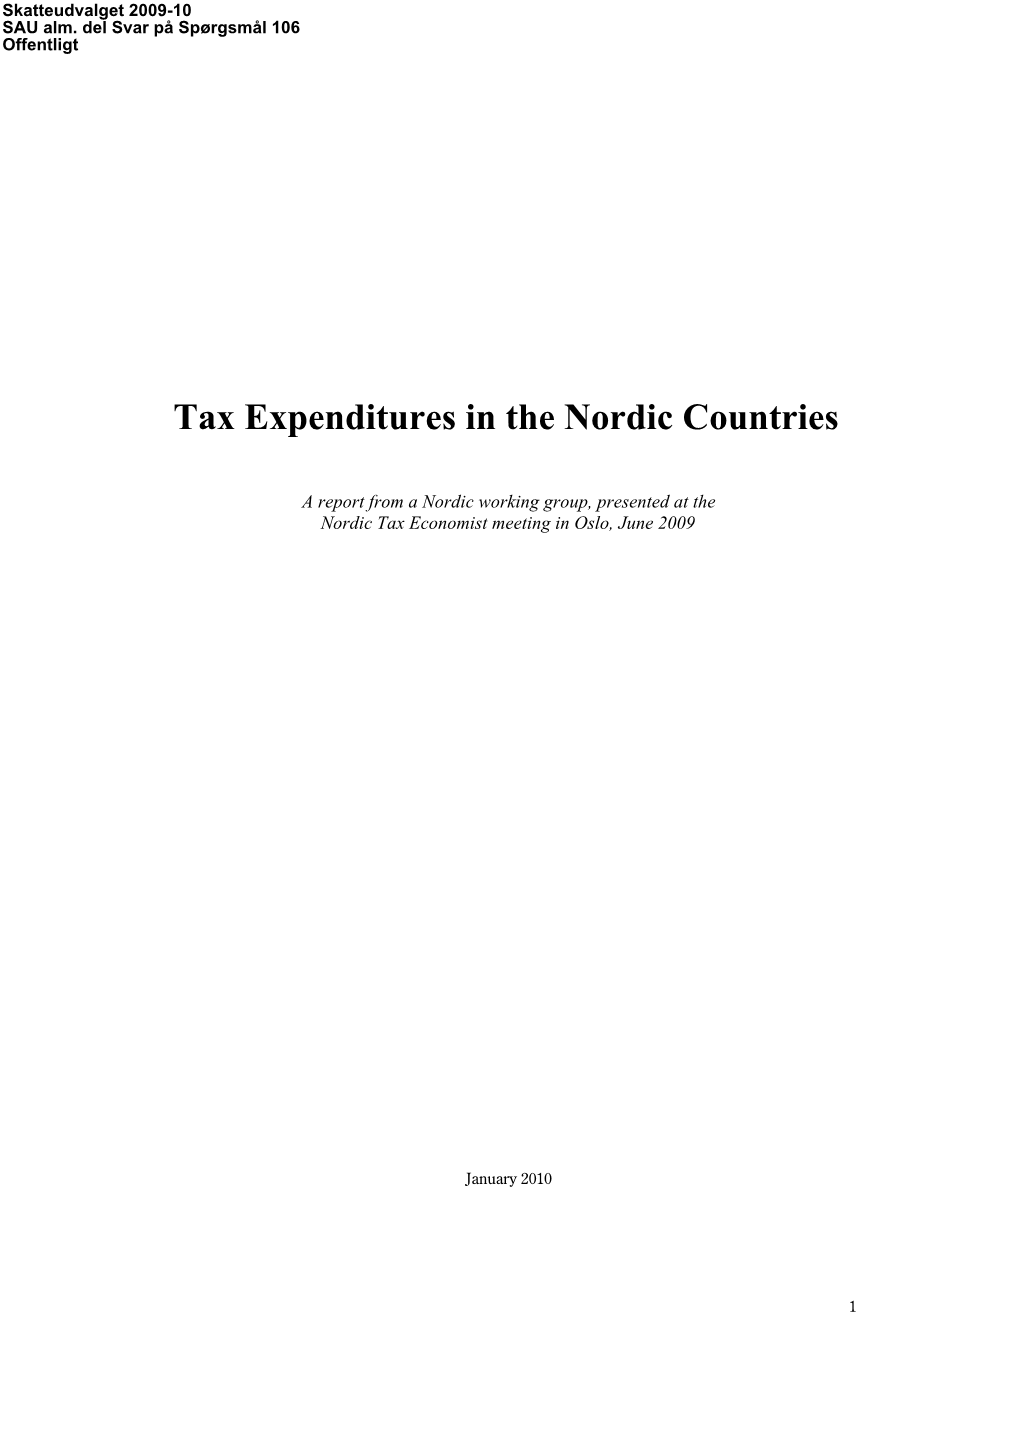 Tax Expenditures in the Nordic Countries